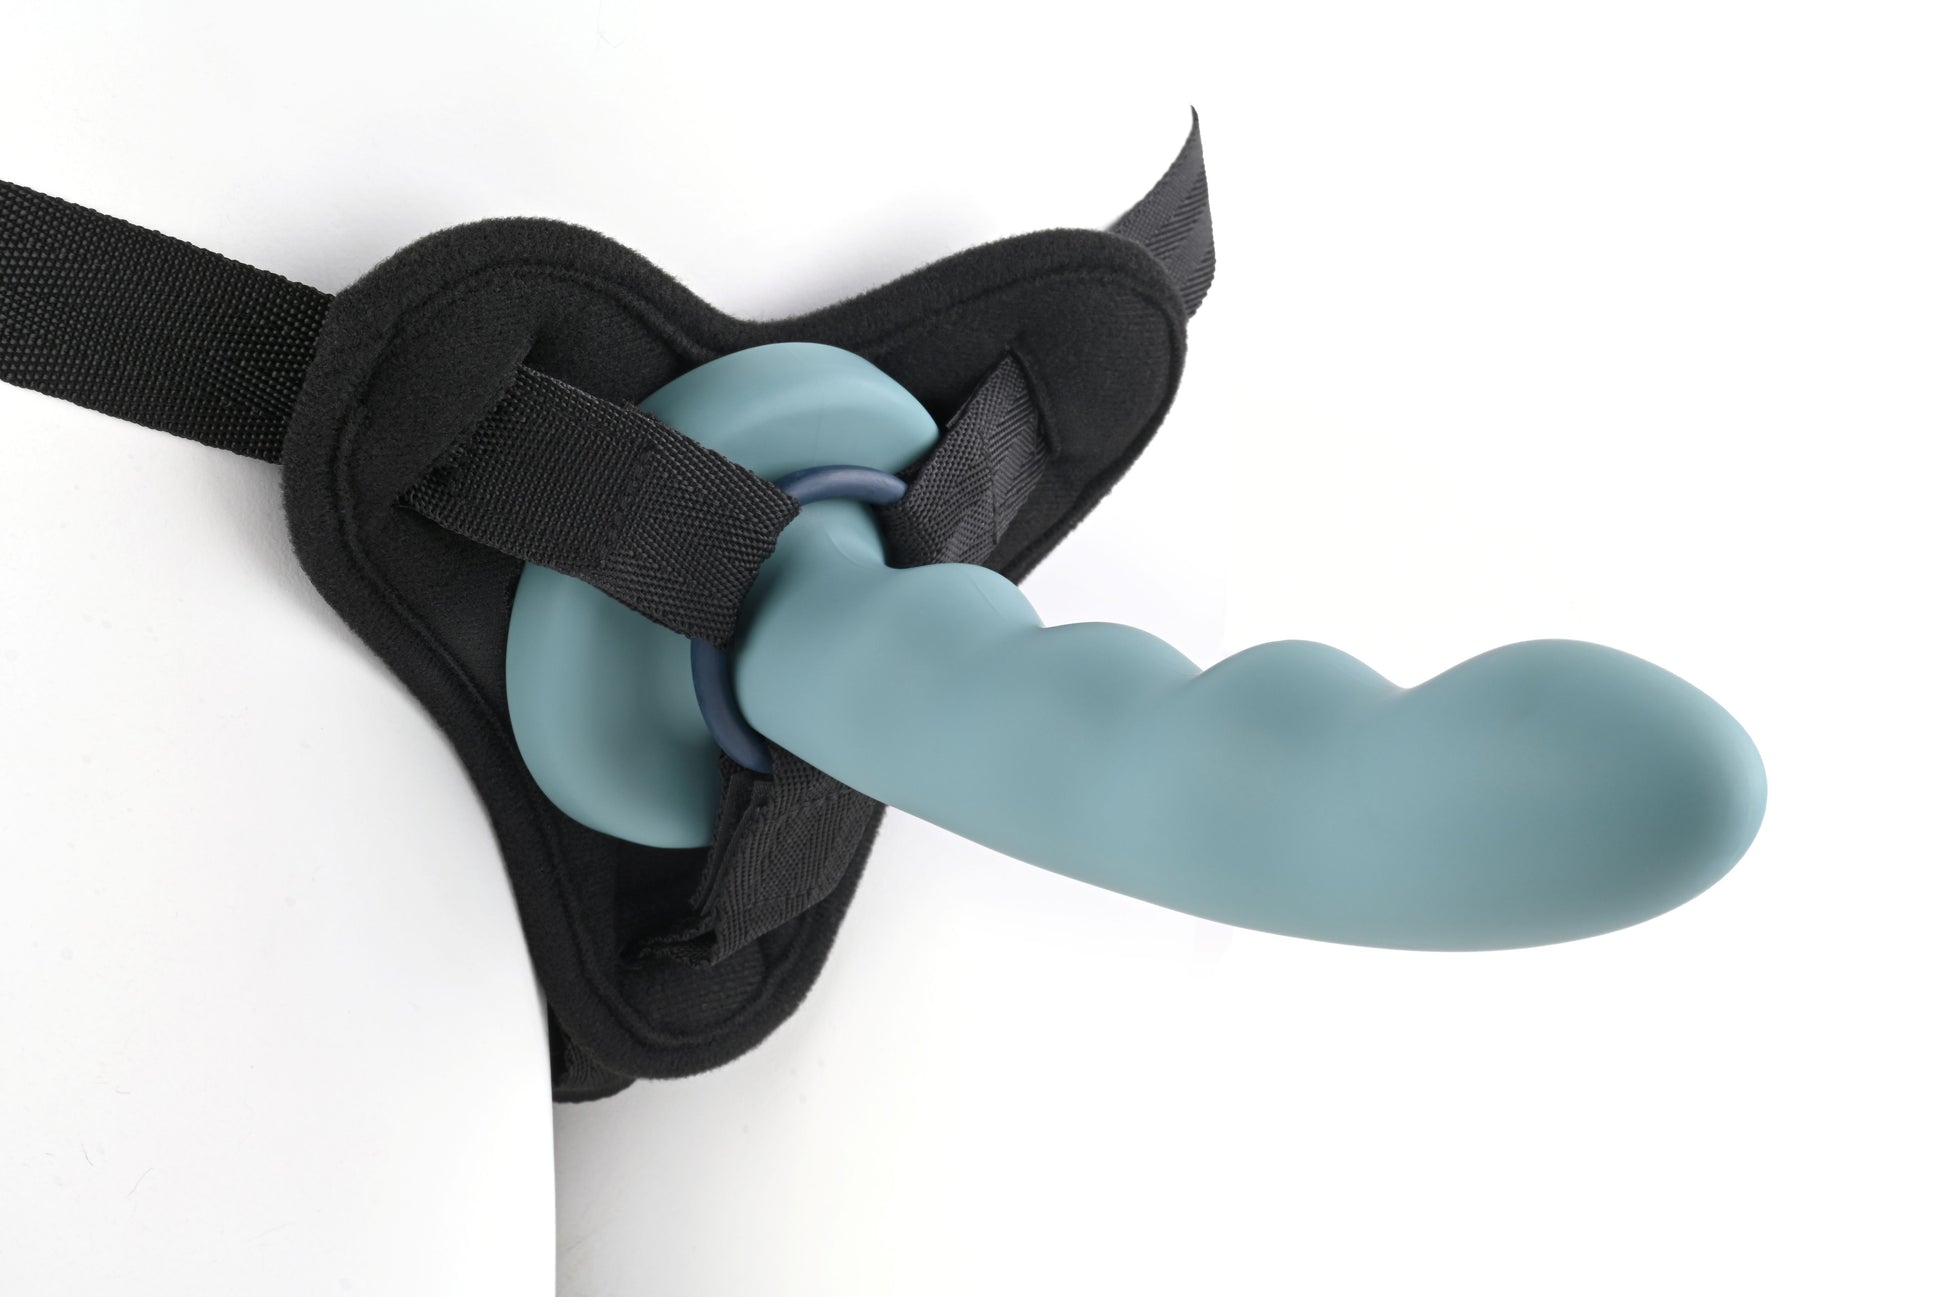 Close-up of a harness and dildo combination with one of the O-rings (navy).